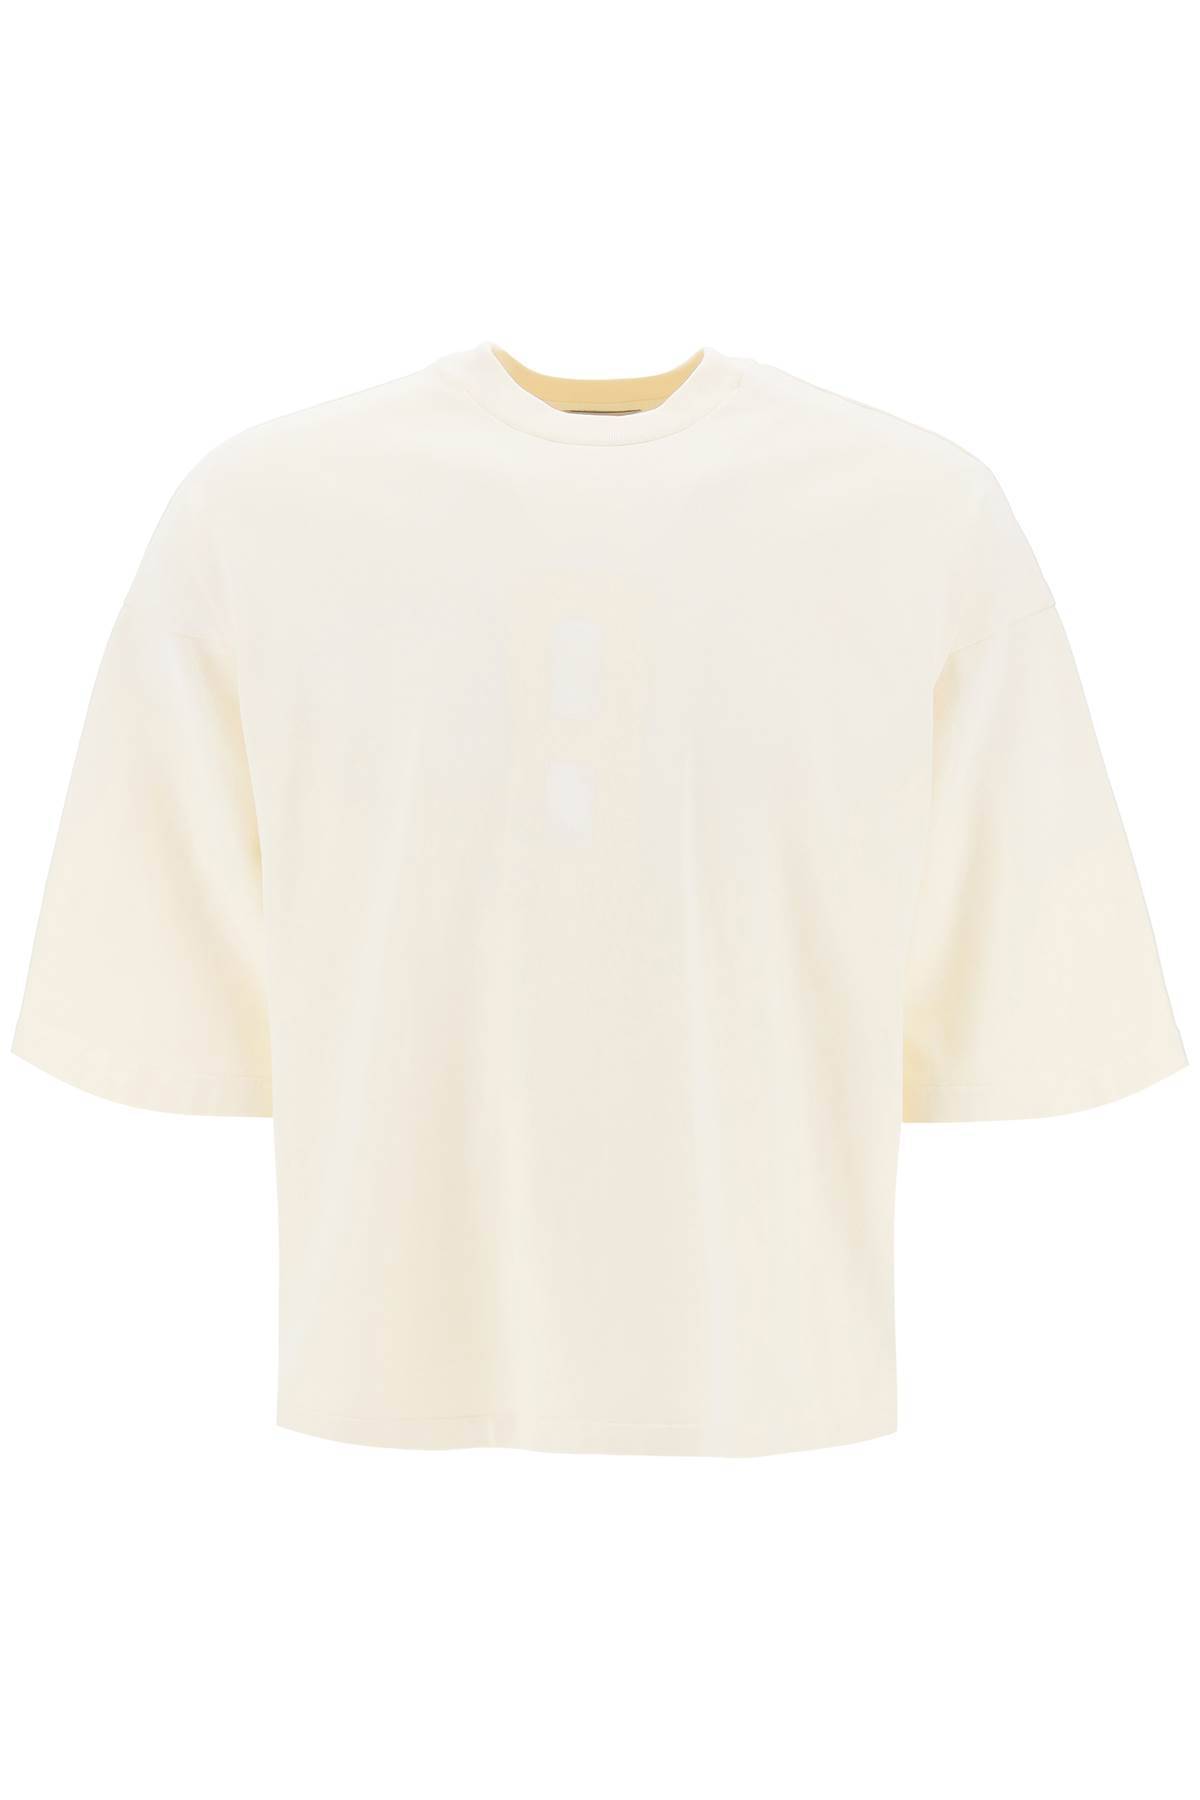 Fear Of God FEAR OF GOD "oversized t-shirt with